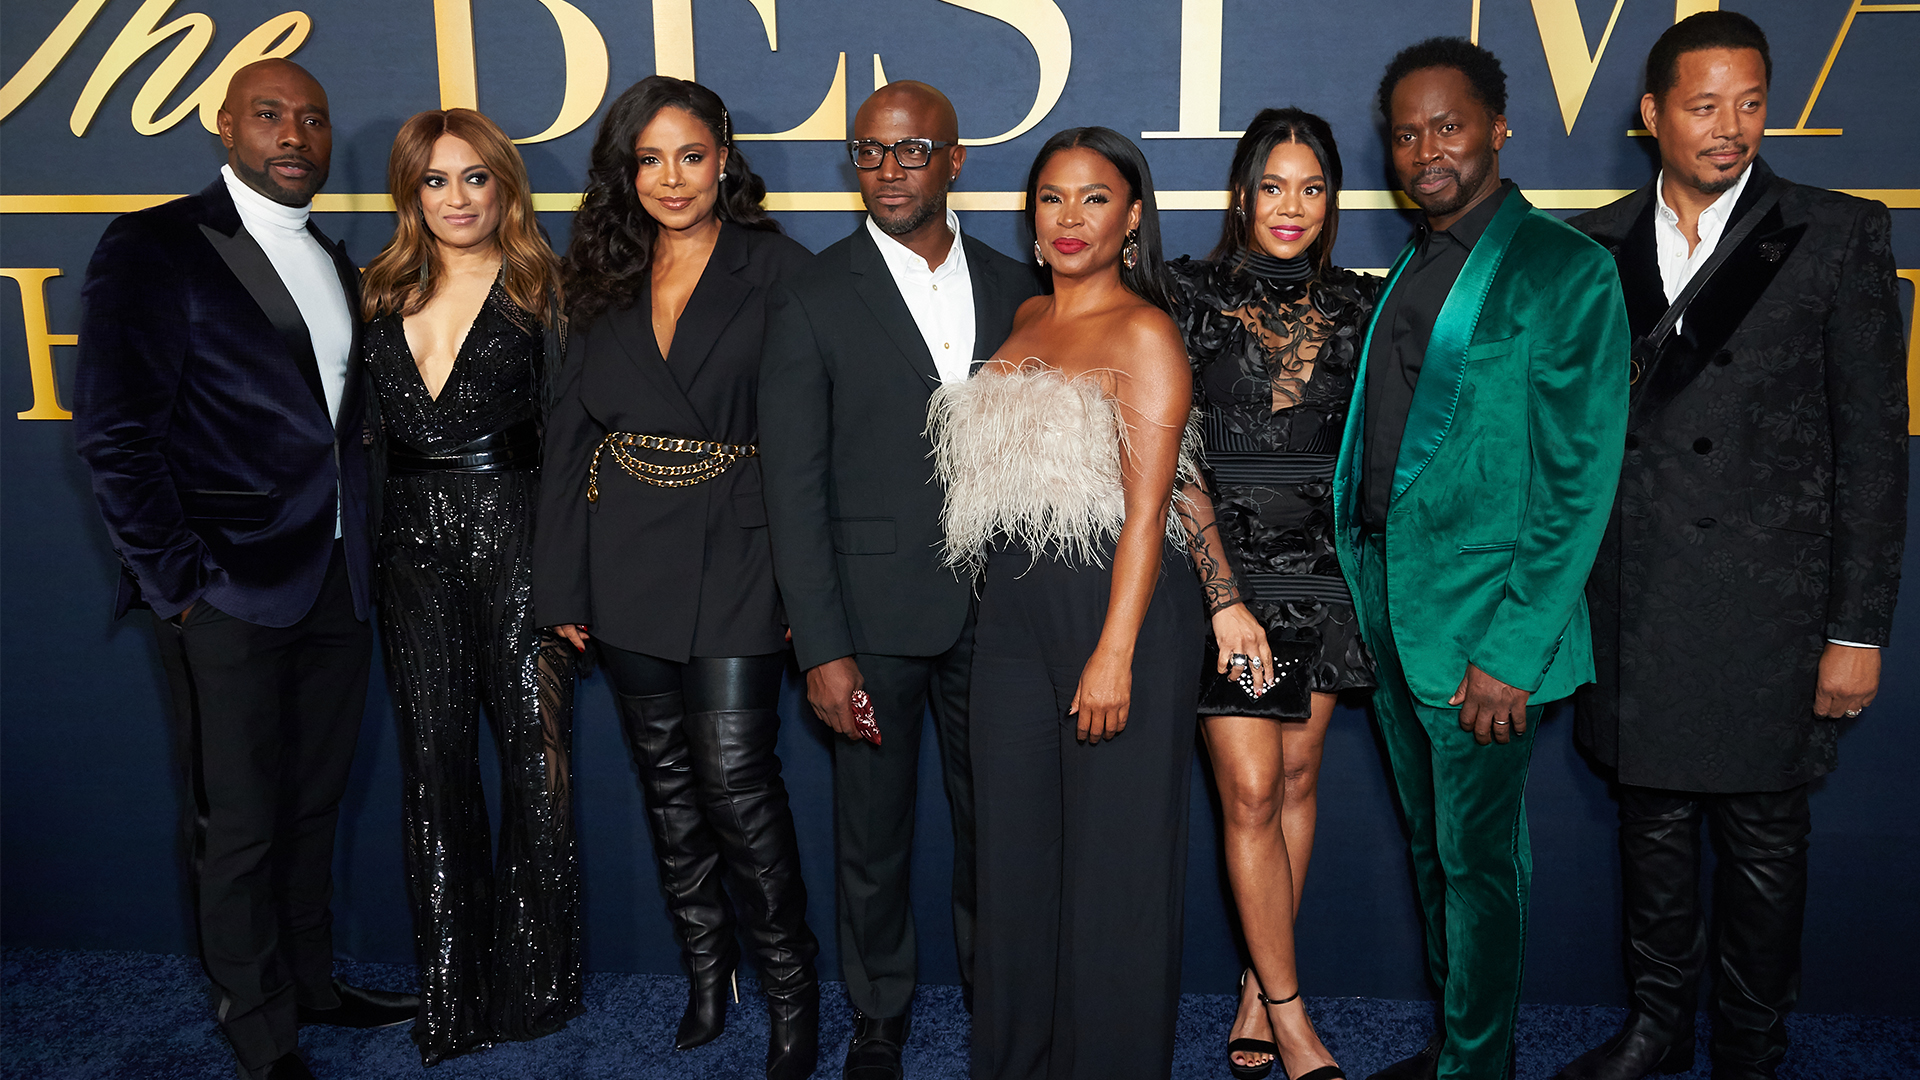 Taye Diggs Says He And The Cast For 'The Best Man Holiday' Were Paid 'Pennies'